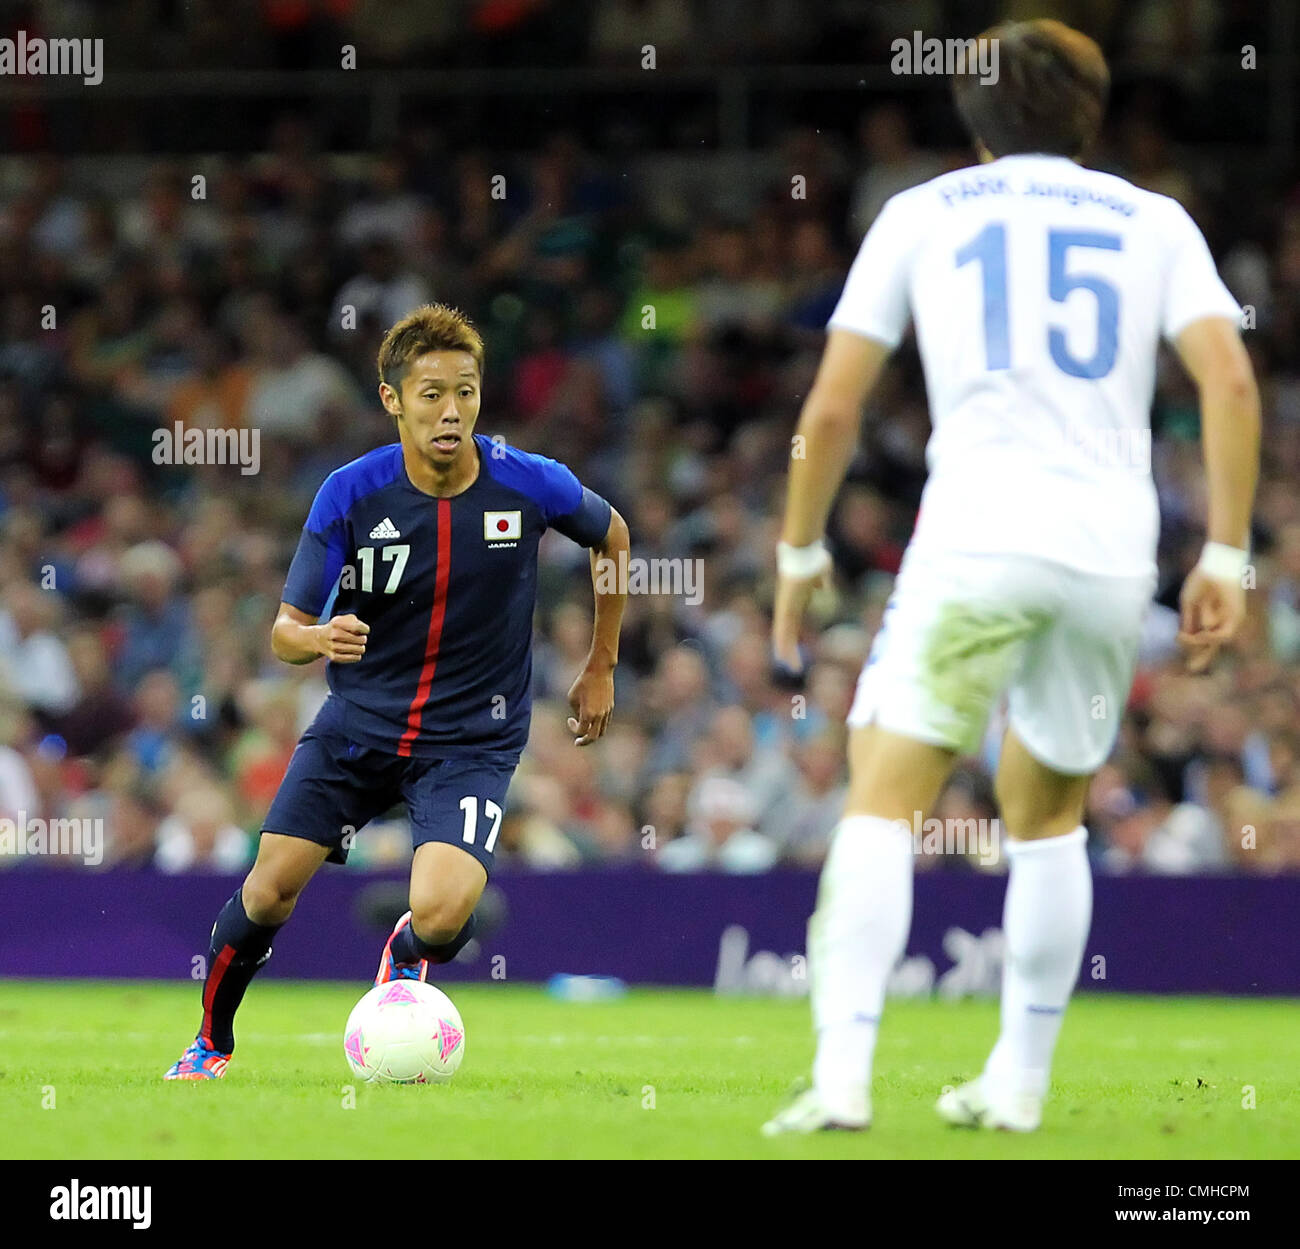 10th Aug 2012. 10.08.2012 Cardiff, Wales. Japan Midfielder Hiroshi Kiyotake (1. FC Nuremberg)  in action during the Olympic Football Men's Bronze Medal Match between Japan and Republic of Korea. South Korea win the London 2012 Olympic Games Bronze Medal by beating Japan 2-0. Stock Photo